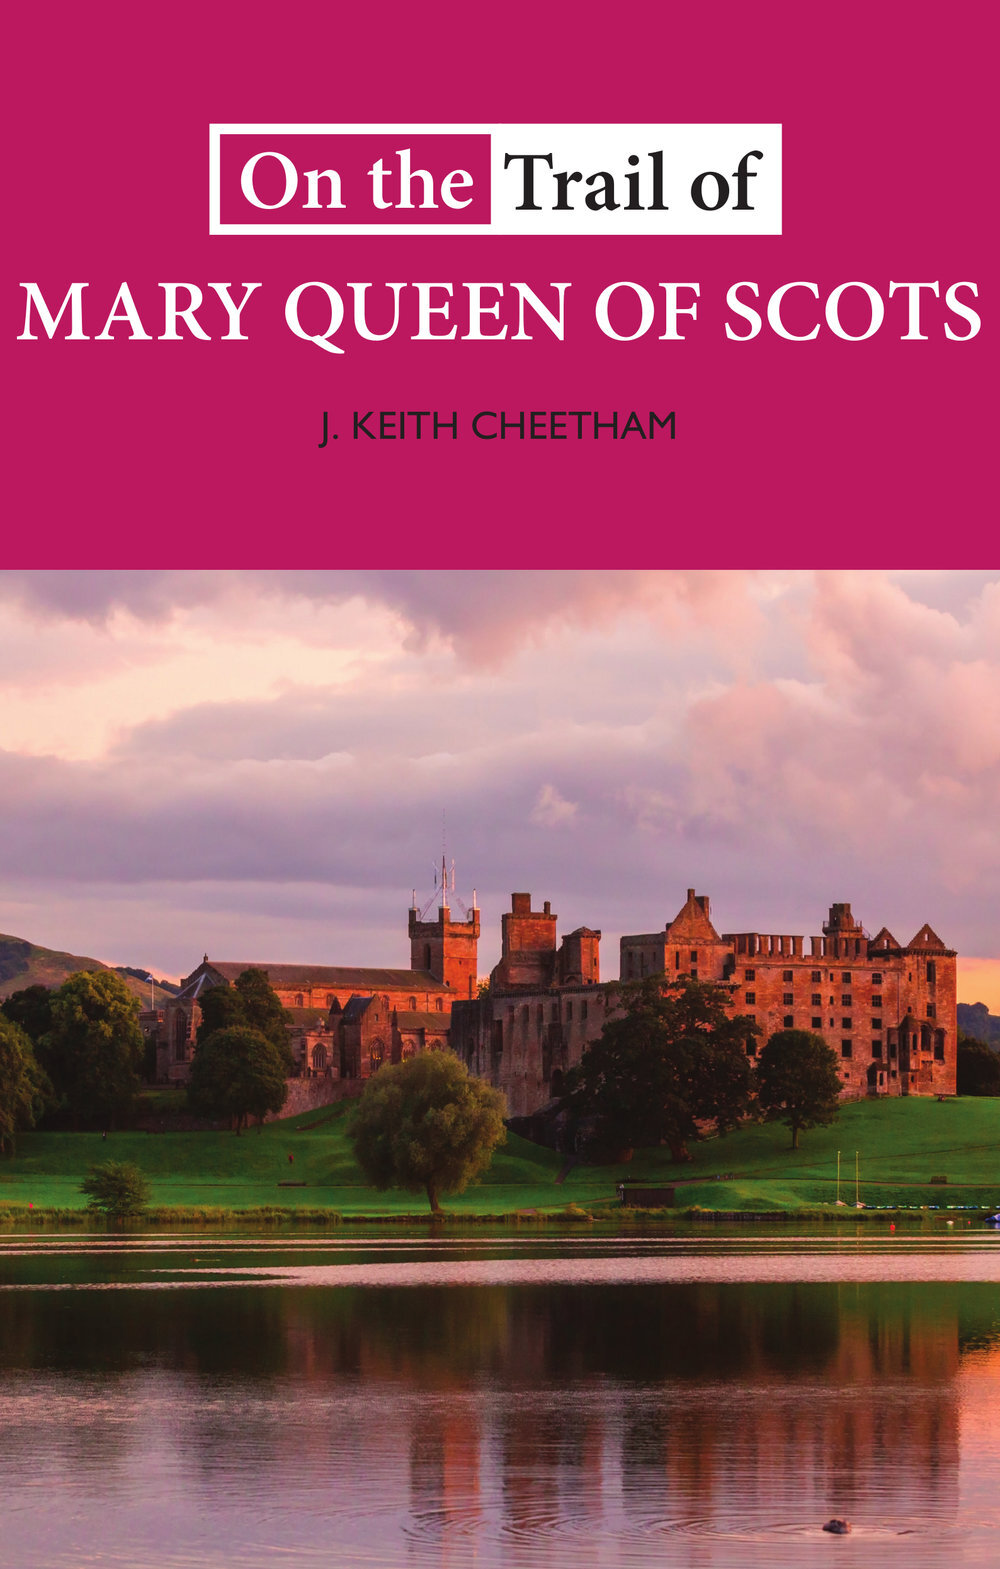 On+the+Trail+of+Mary+Queen+of+Scots+J+Keith+Cheetham+9781913025113+Luath+Press.jpg